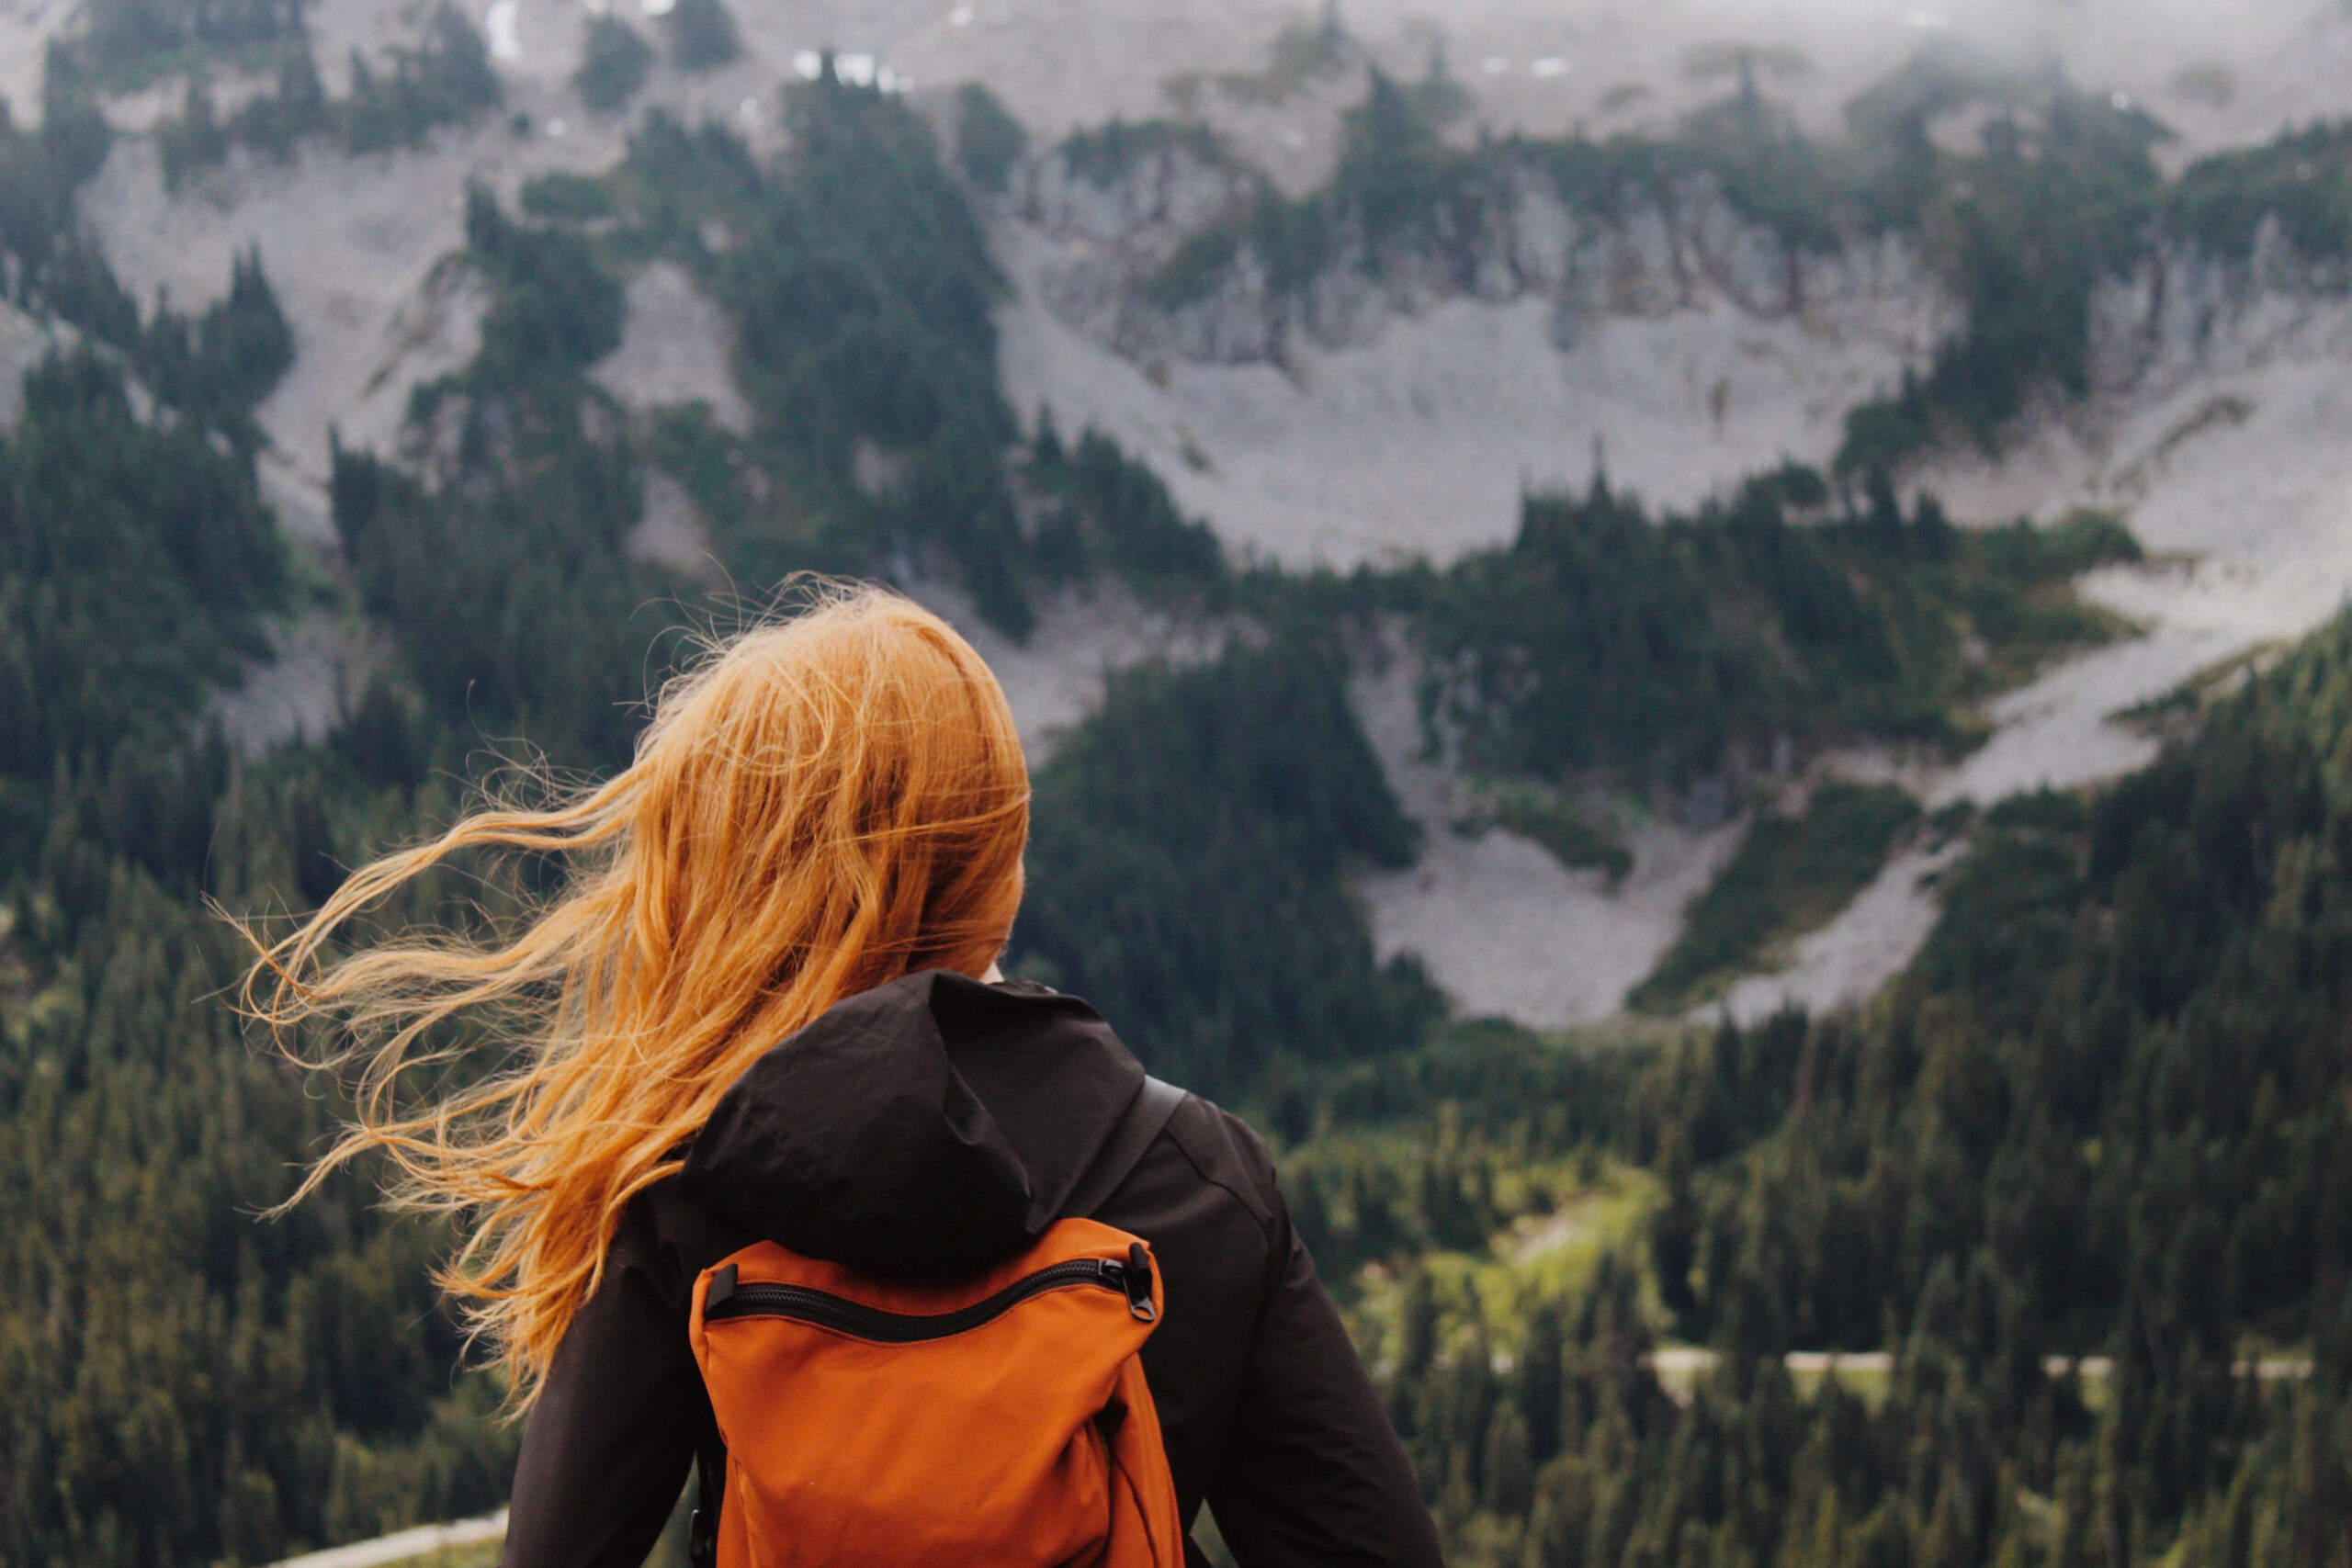 A back photo of a person with flowing hair and carrying an orange backpack. There is also a partially snow covered mountain in view.